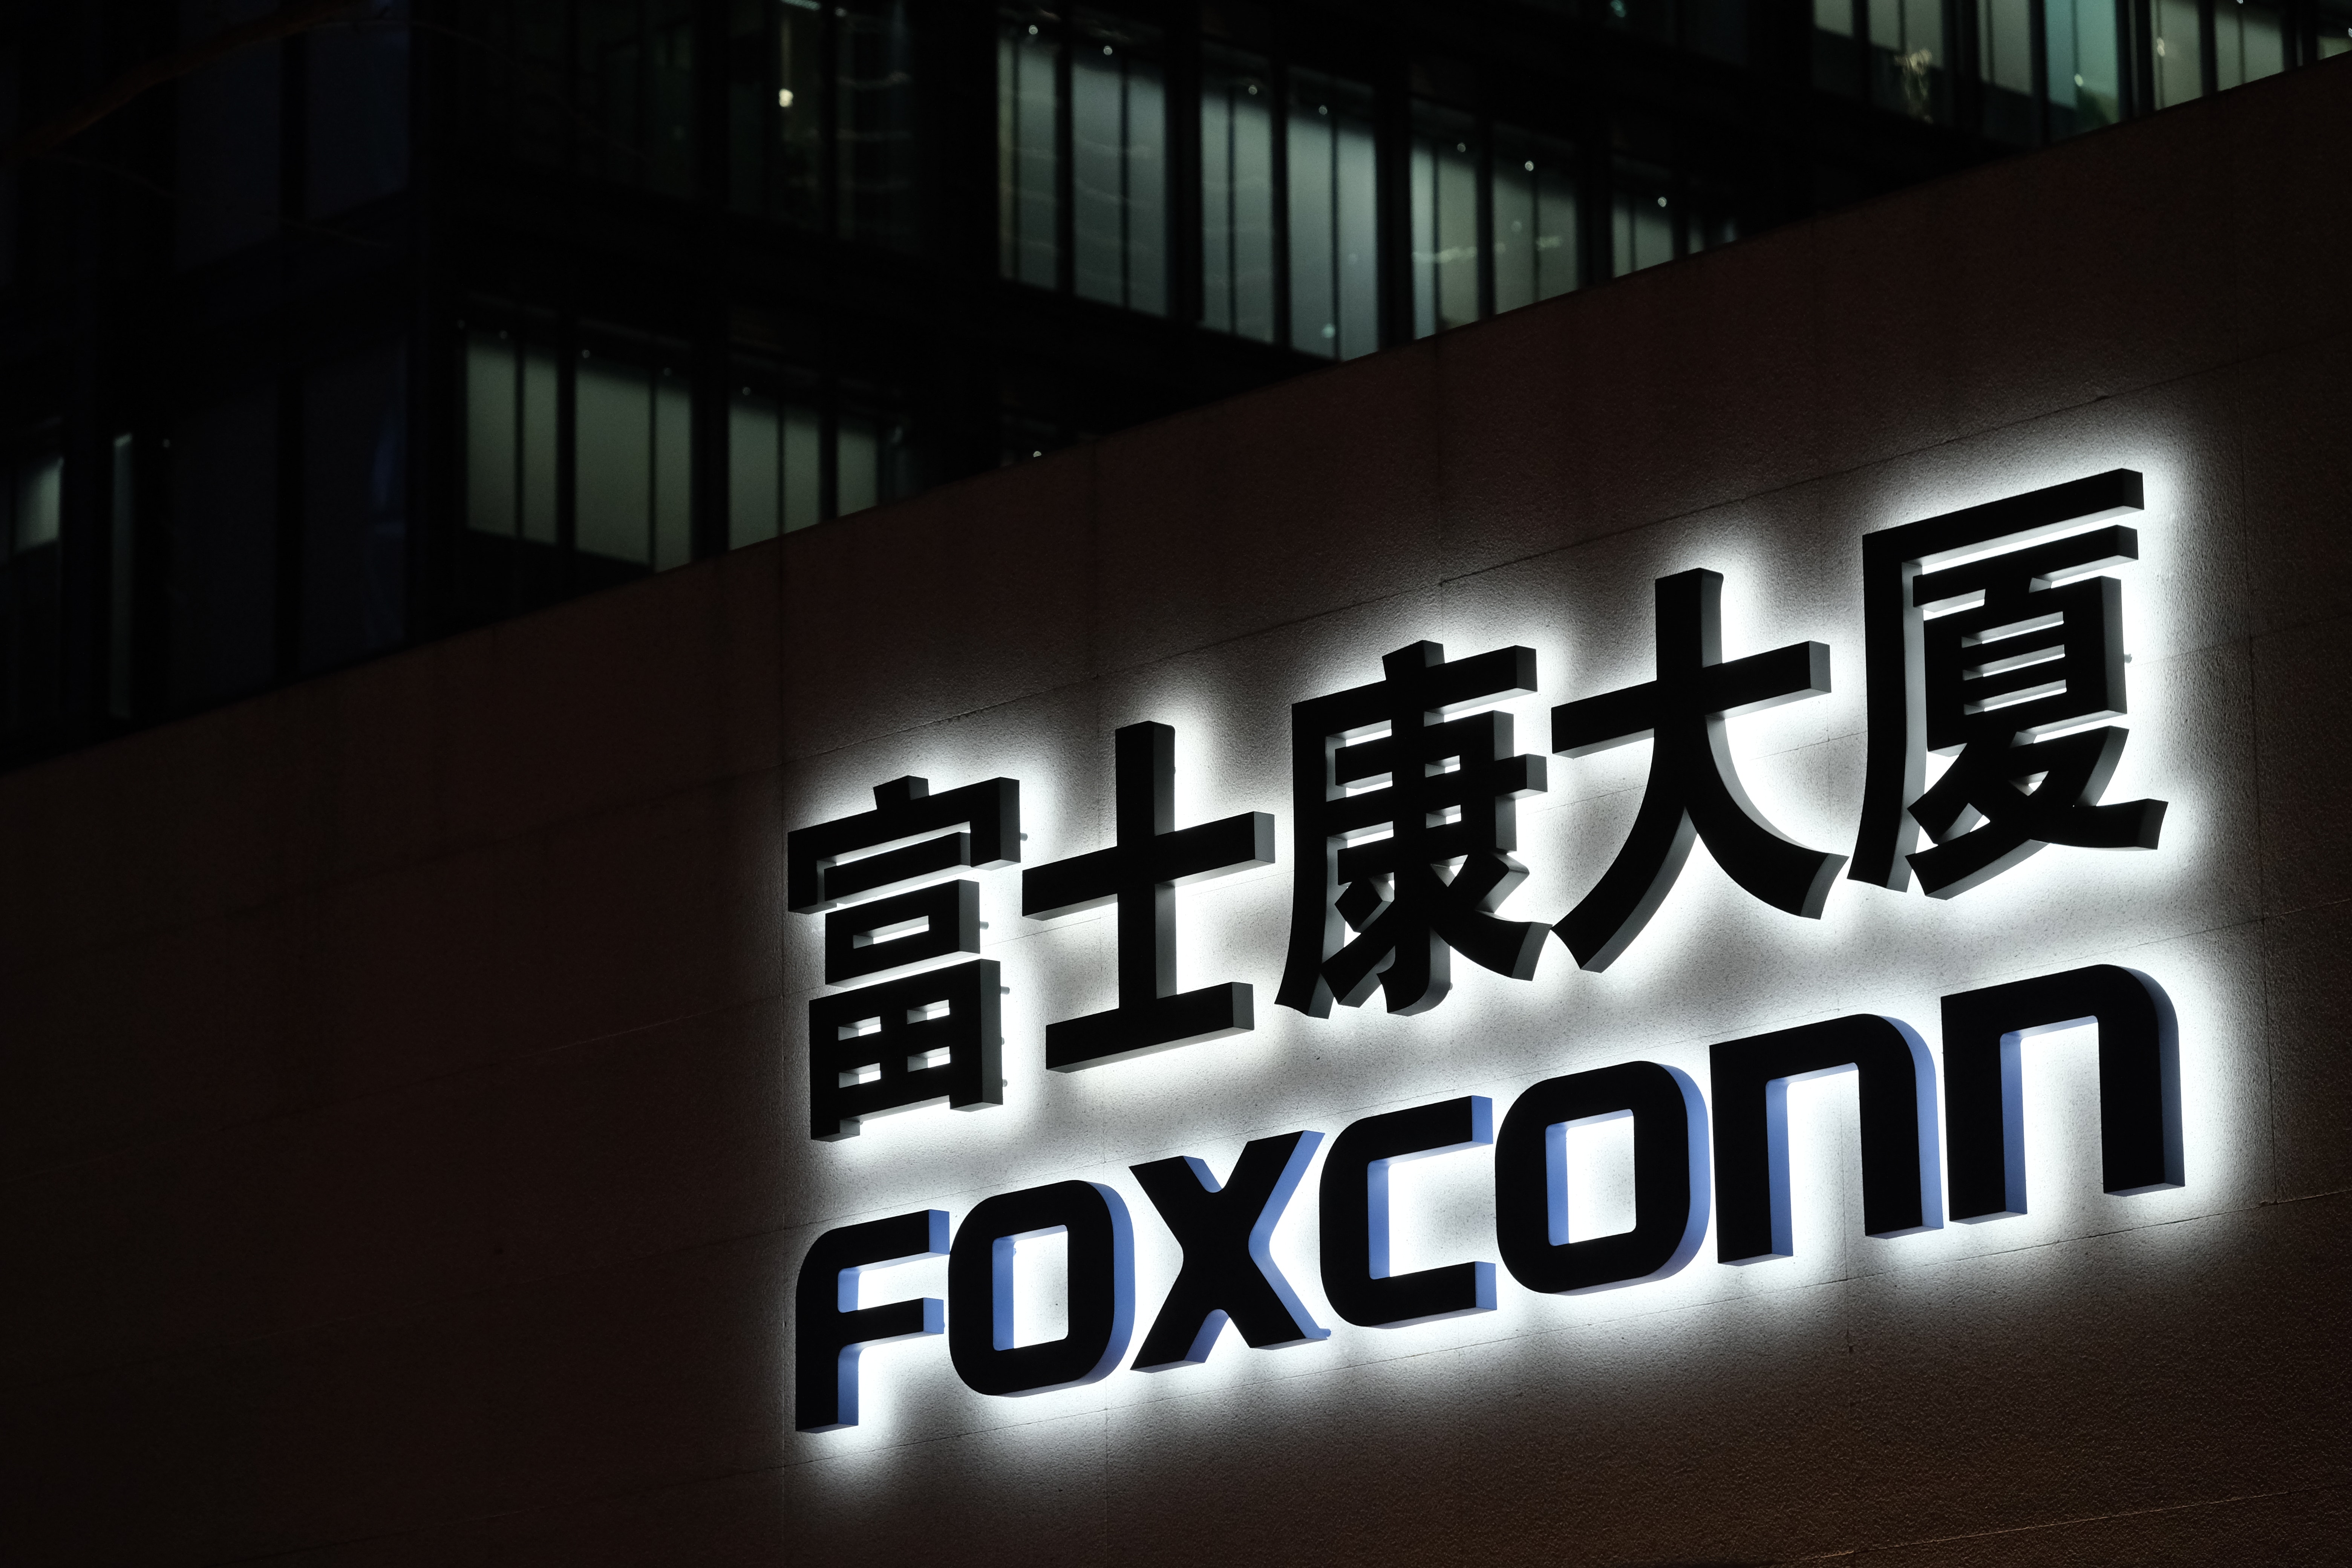 Apple Supplier Foxconn Posts Record Q3 Revenue: Says 'Cautiously Positive' On Q4 Outlook